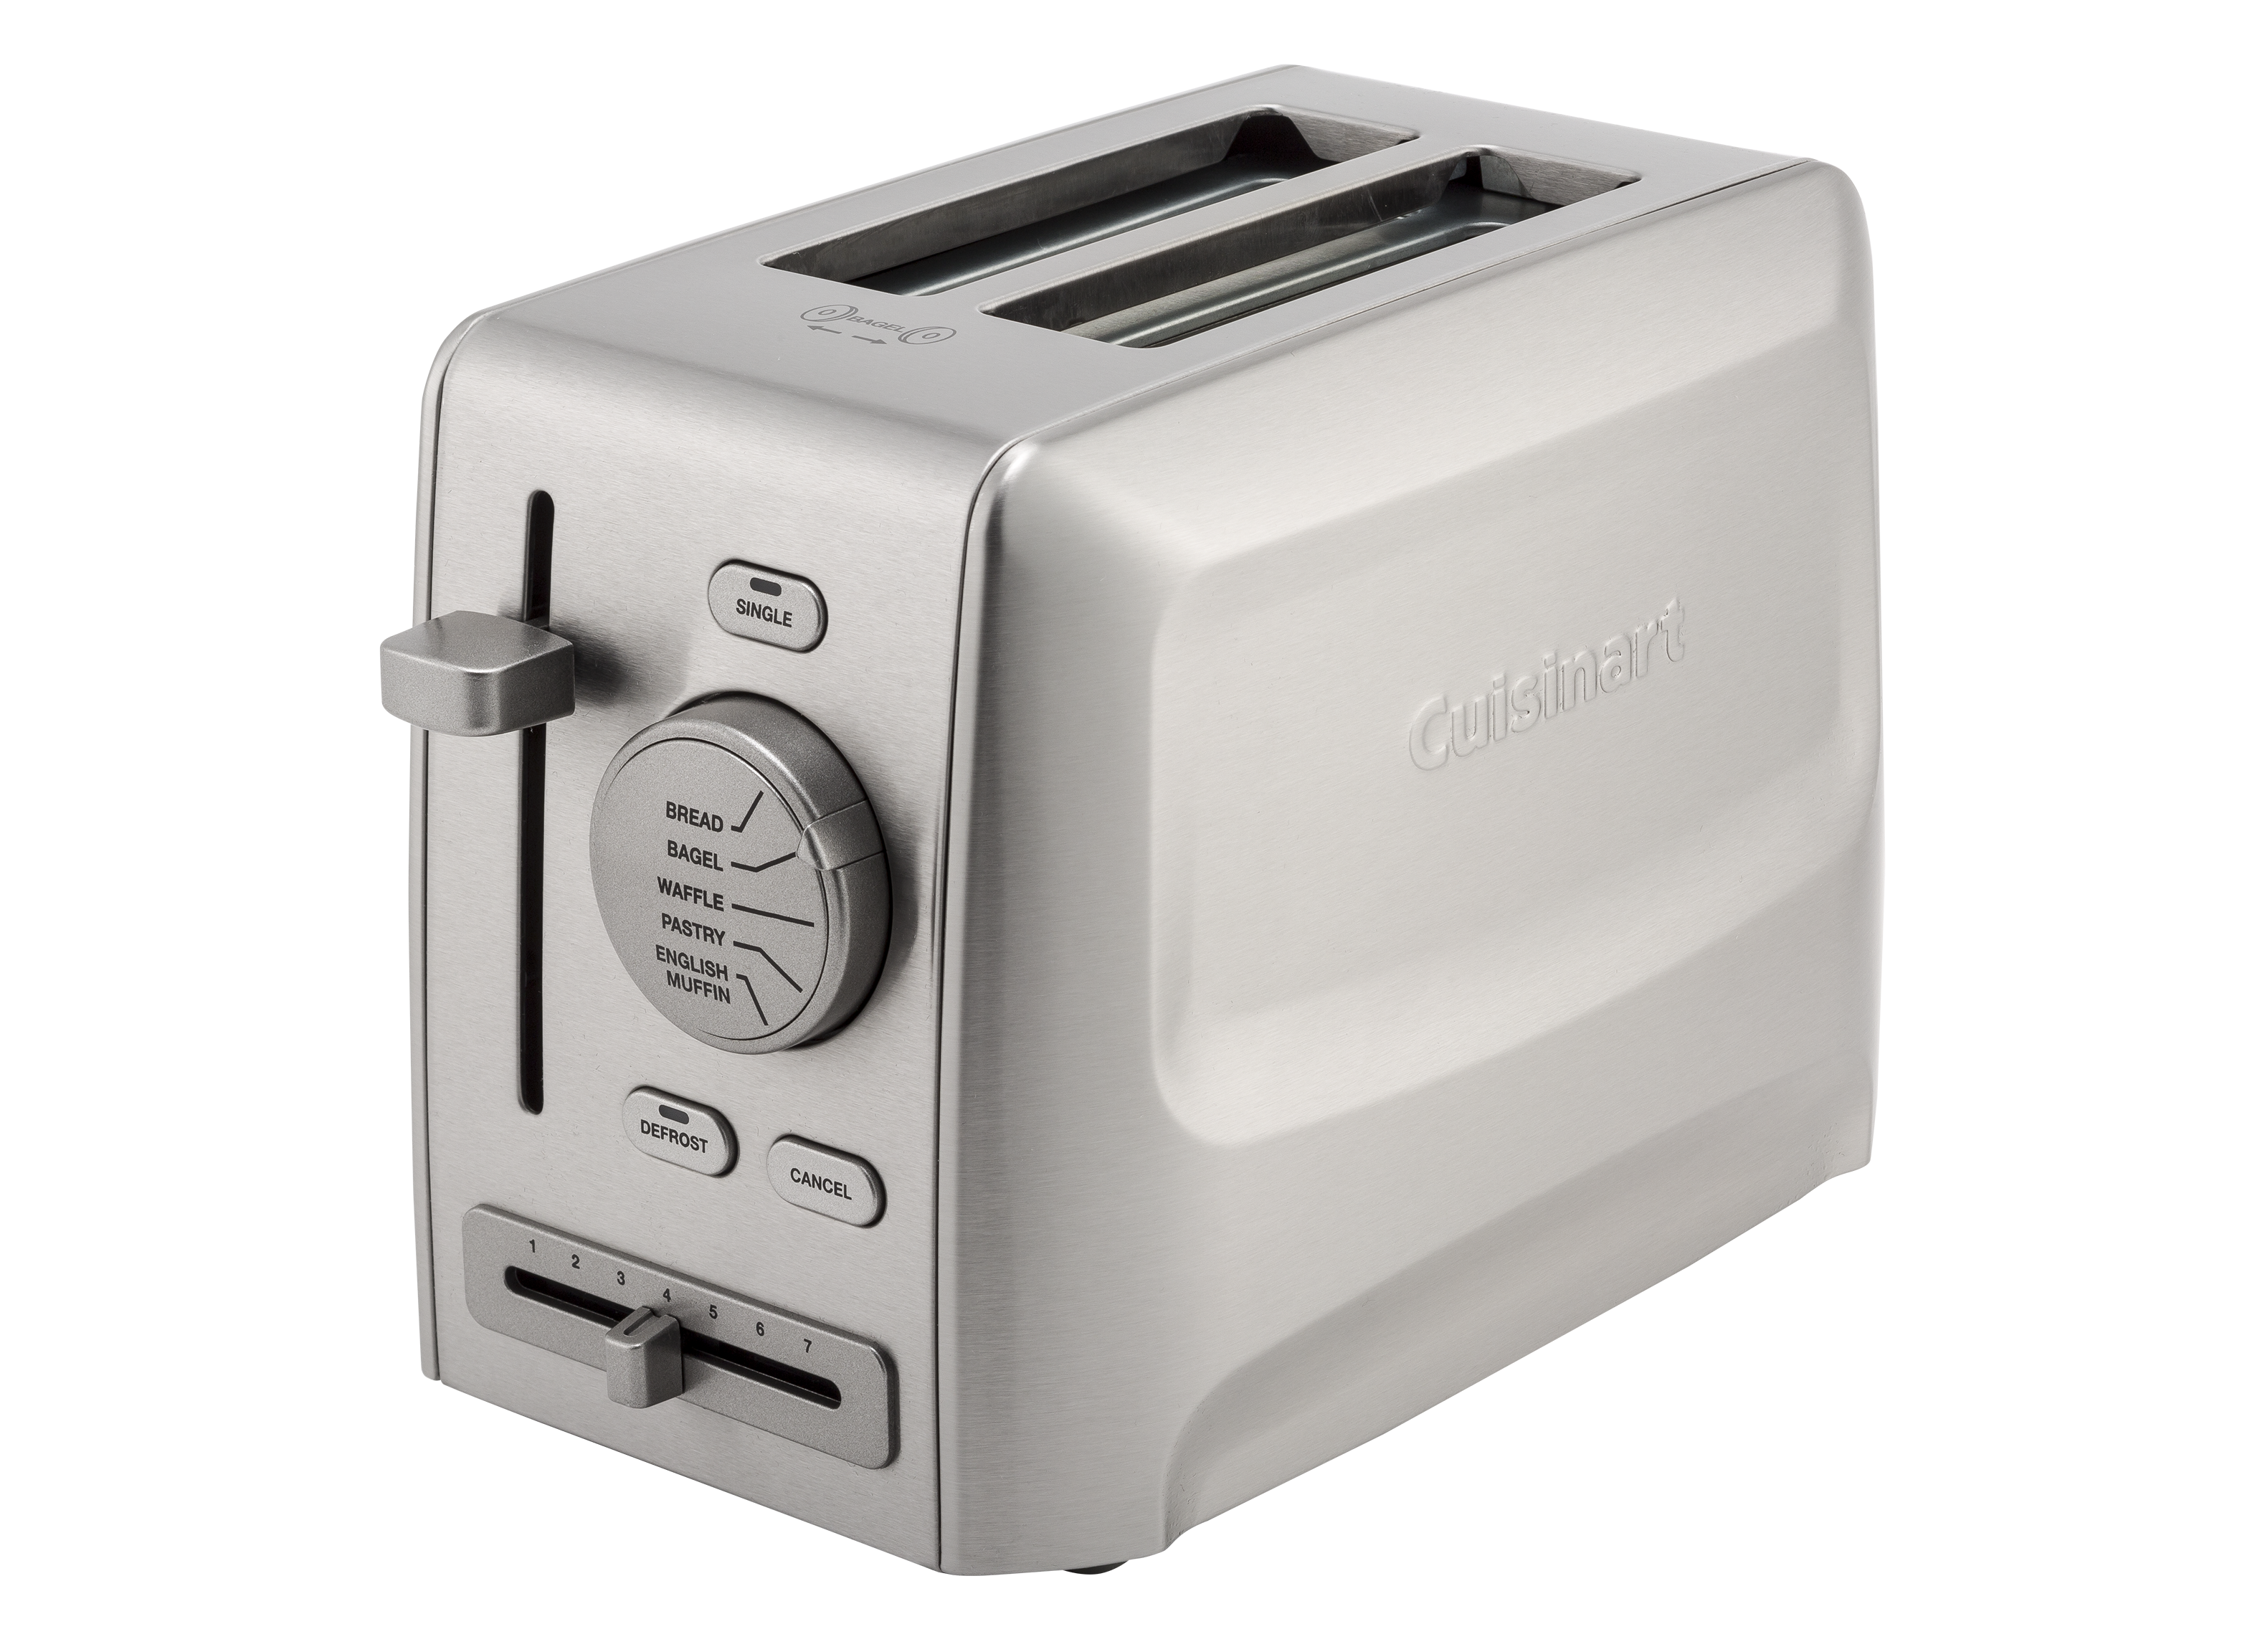 https://crdms.images.consumerreports.org/prod/products/cr/models/387665-toasters-cuisinart-cpt6202slice.png